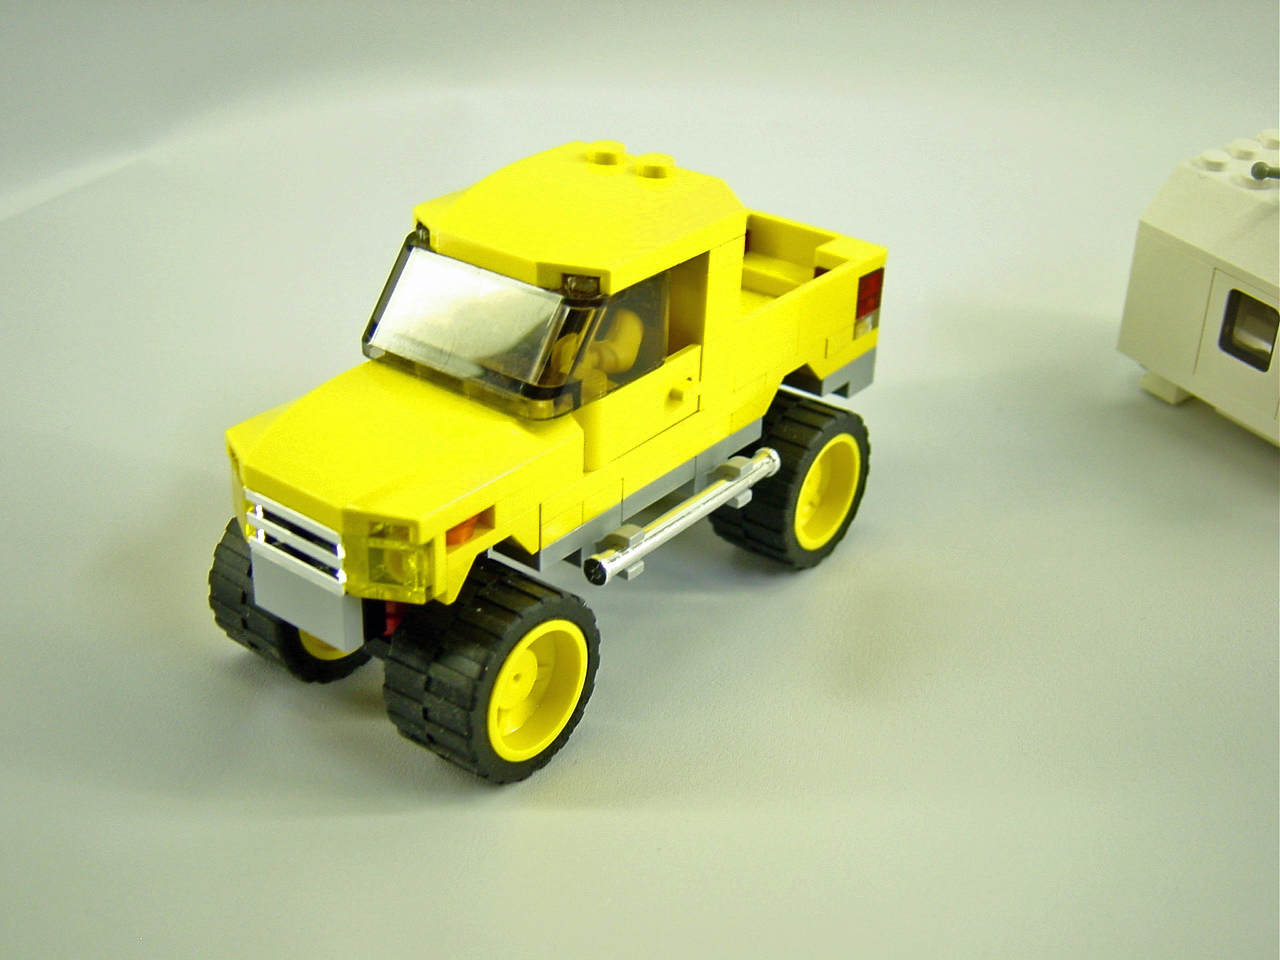 yellow truck and white car on a table